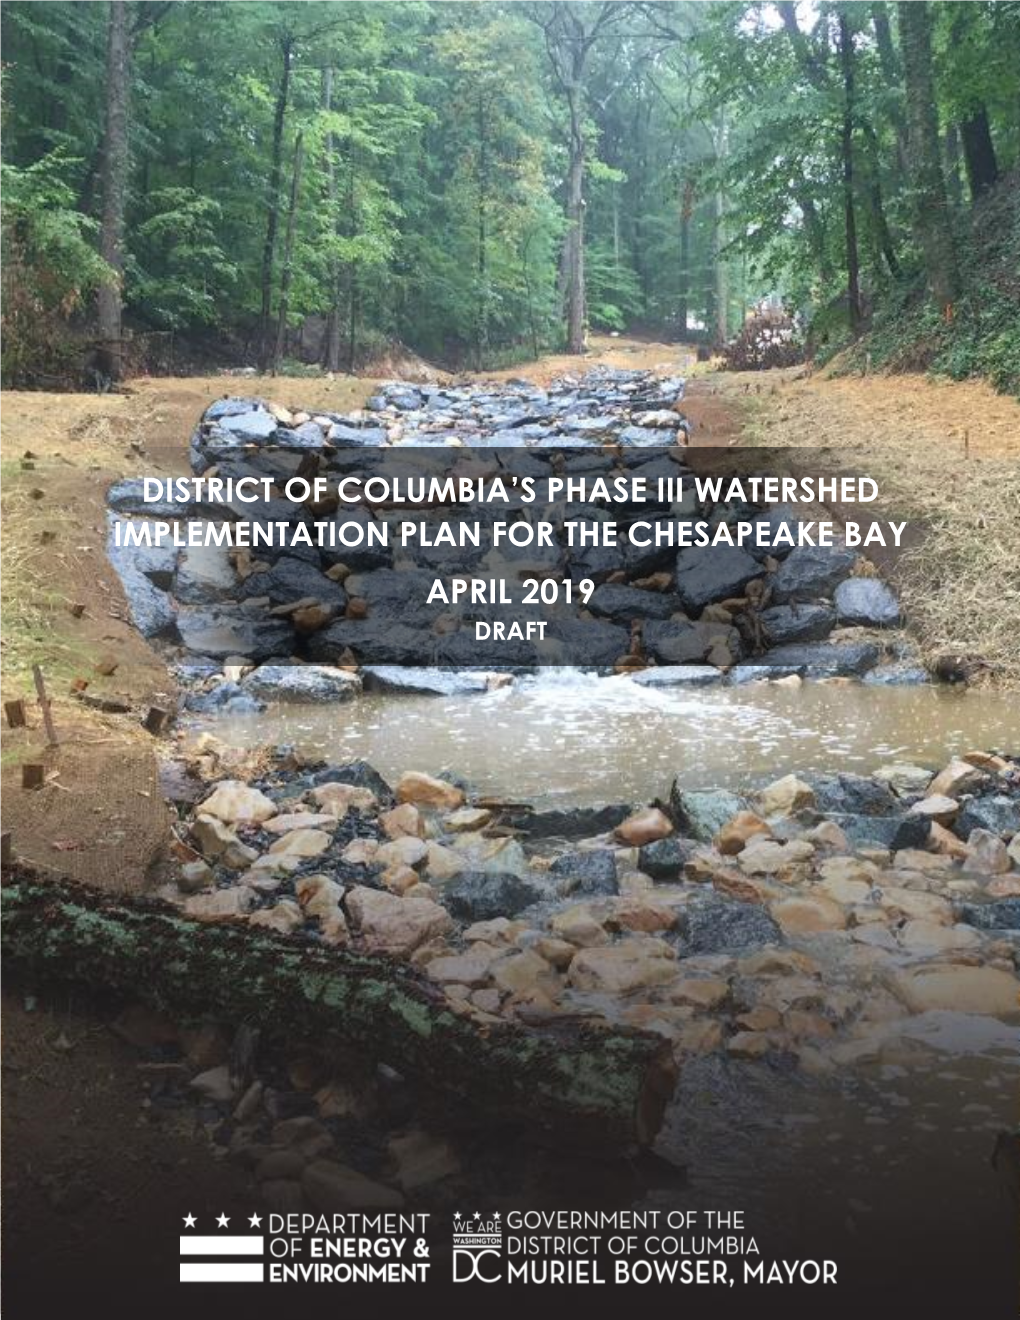 District of Columbia's Phase Iii Watershed Implementation Plan for the Chesapeake Bay April 2019